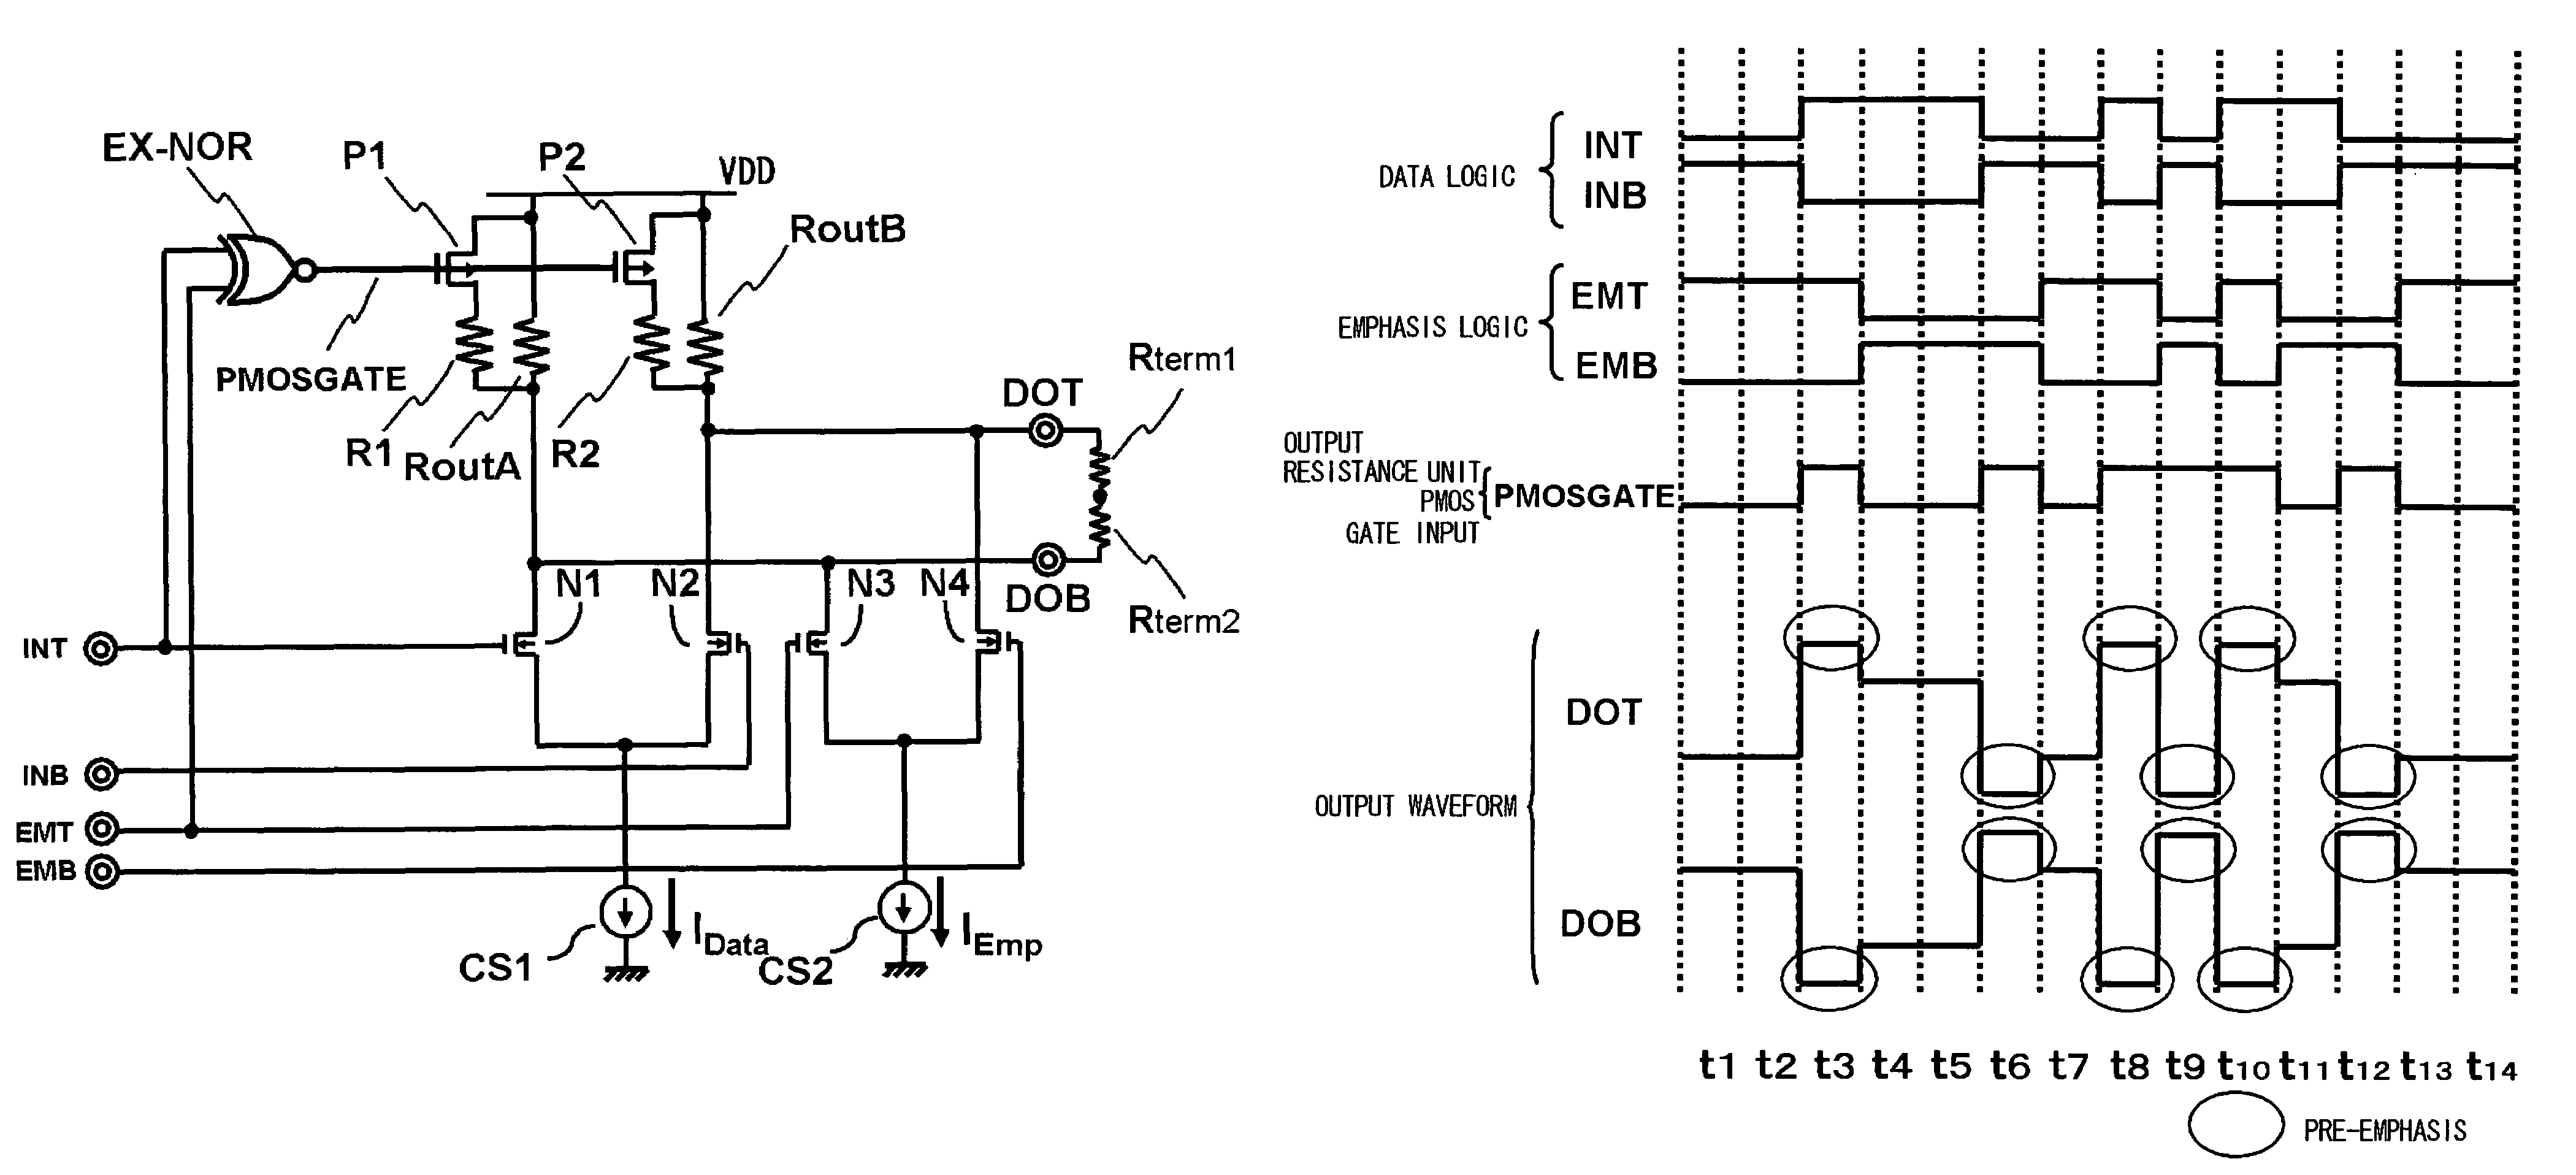 Output buffer circuit with control circuit for changing resistance of output resistor pair